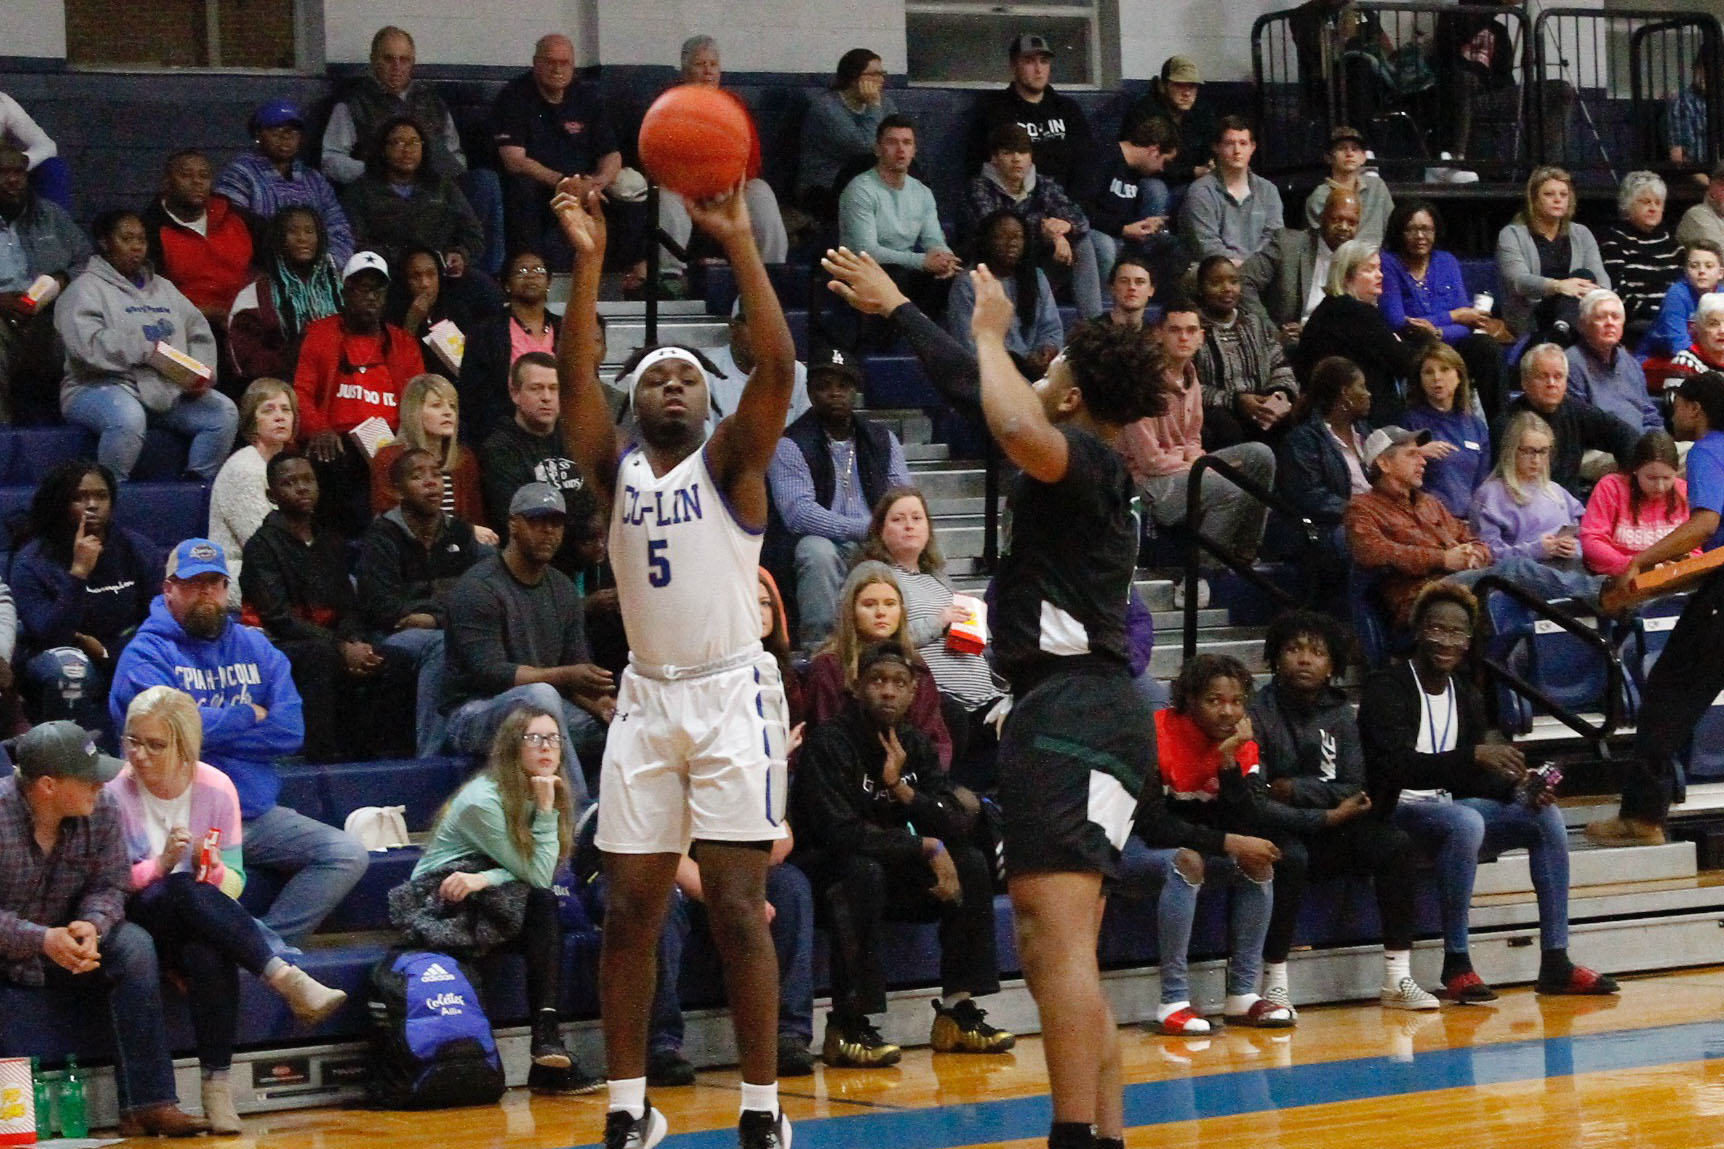 Meridian comes from behind to defeat Co-Lin, 81-73